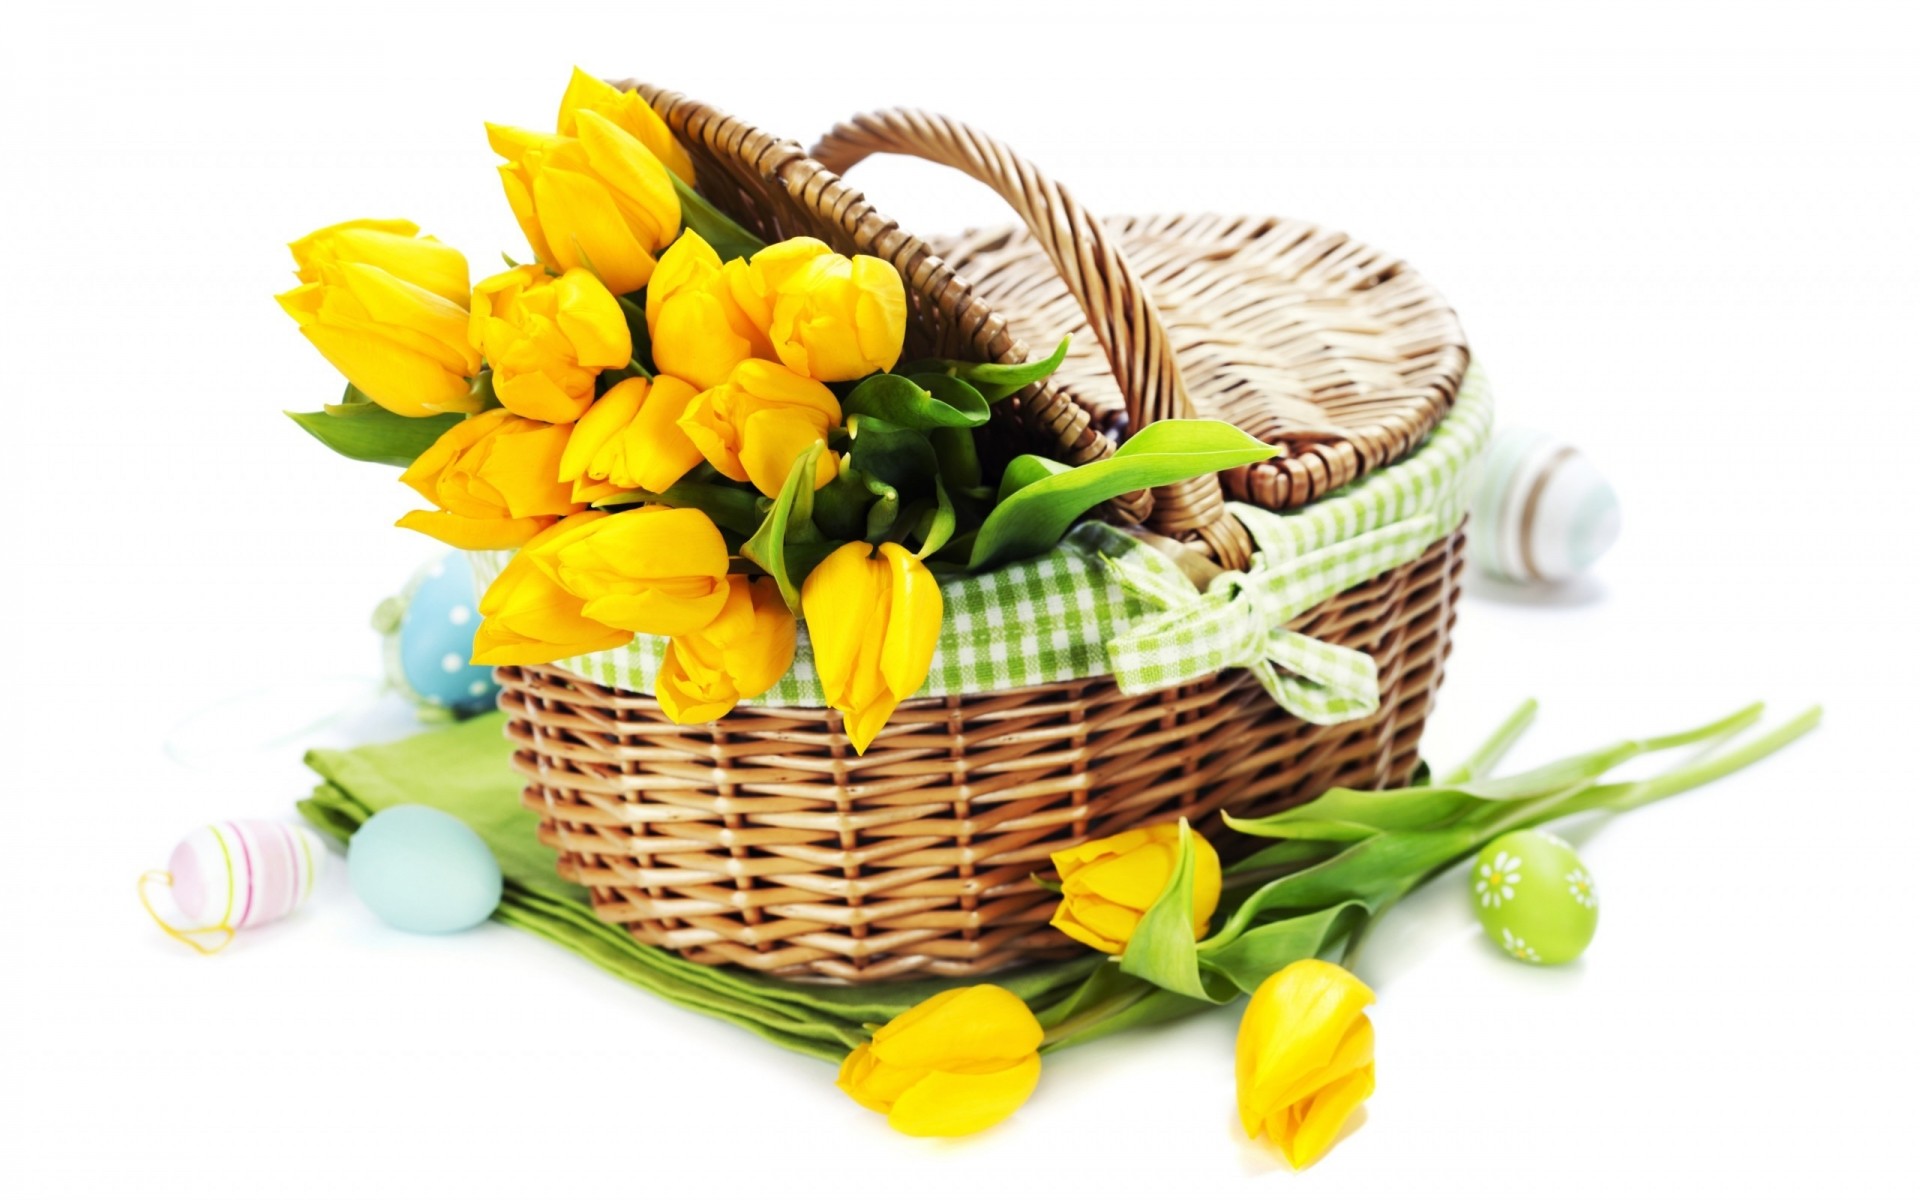 flowers basket leaf easter nature wicker desktop healthy food isolated health flower flora close-up color yellow tulips tulips basket